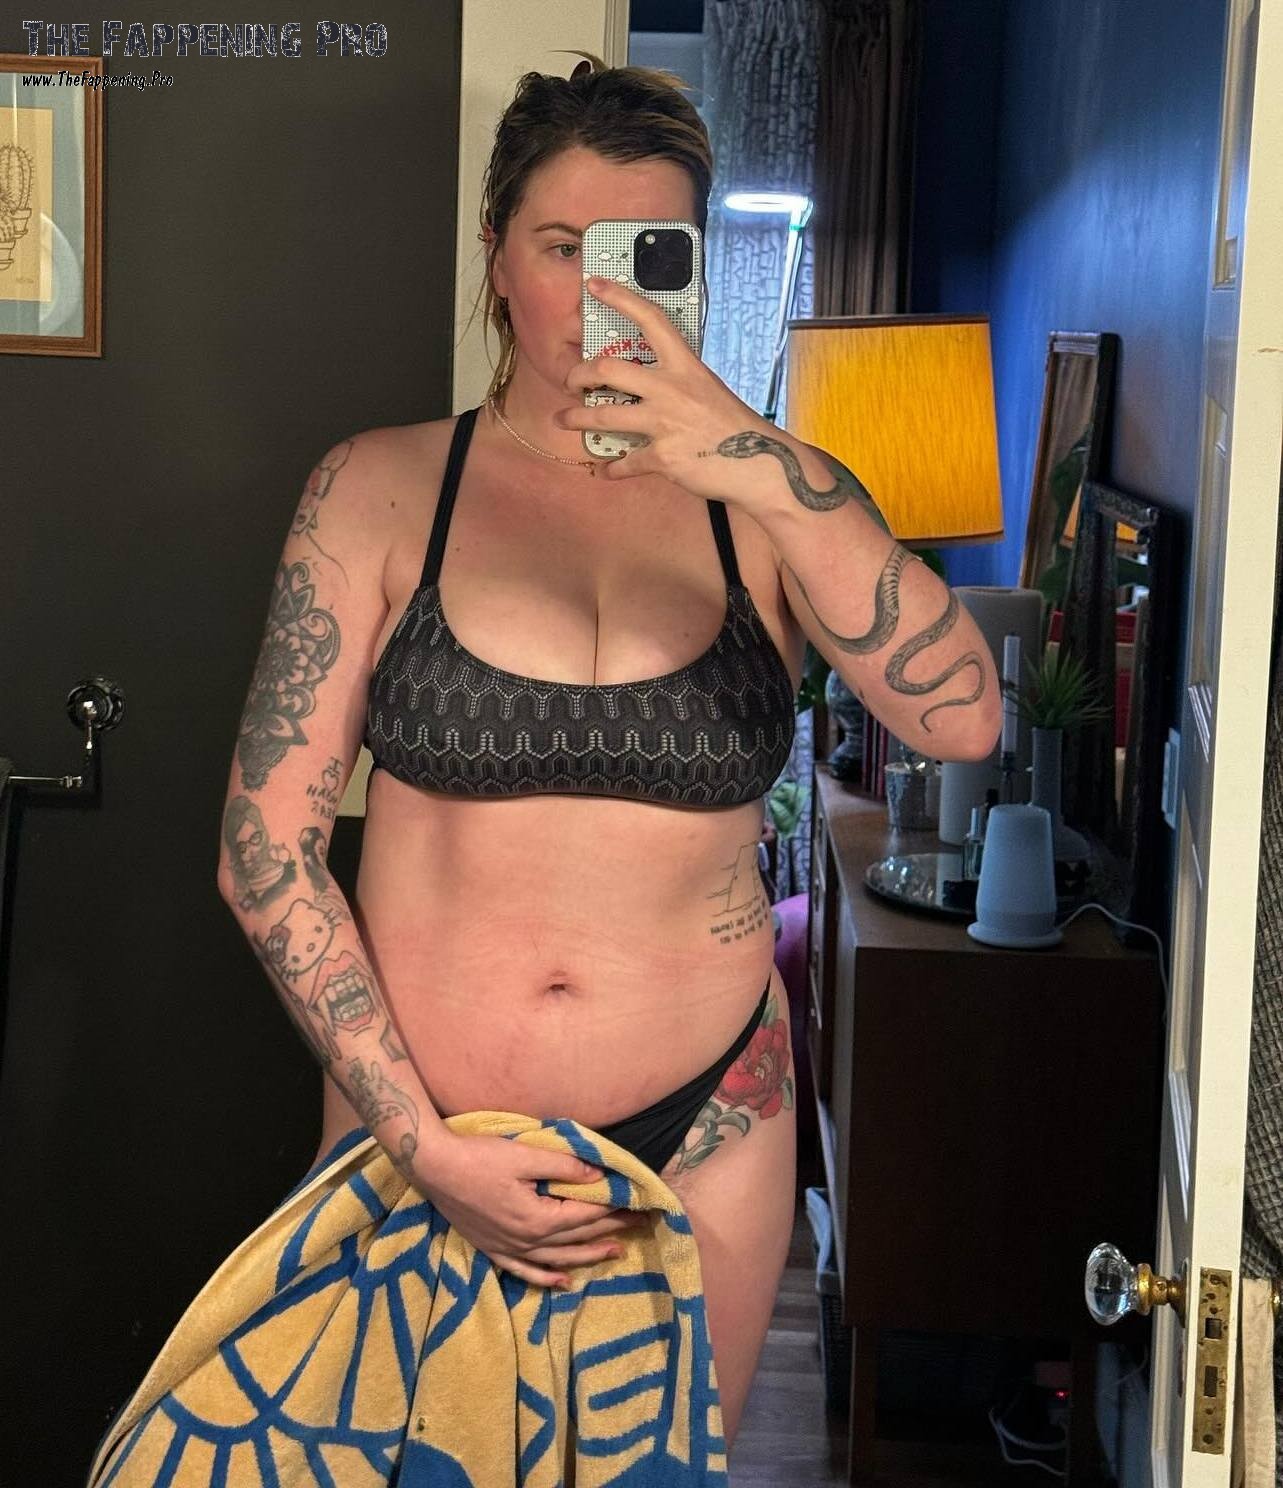 Join Ireland Baldwin on her journey as she opens up about her postpartum body struggles in a revealing lingerie selfie. Despite not fitting the typical Hollywood mold, Ireland embraces her curves and imperfections, proving that beauty comes in all shapes and sizes=